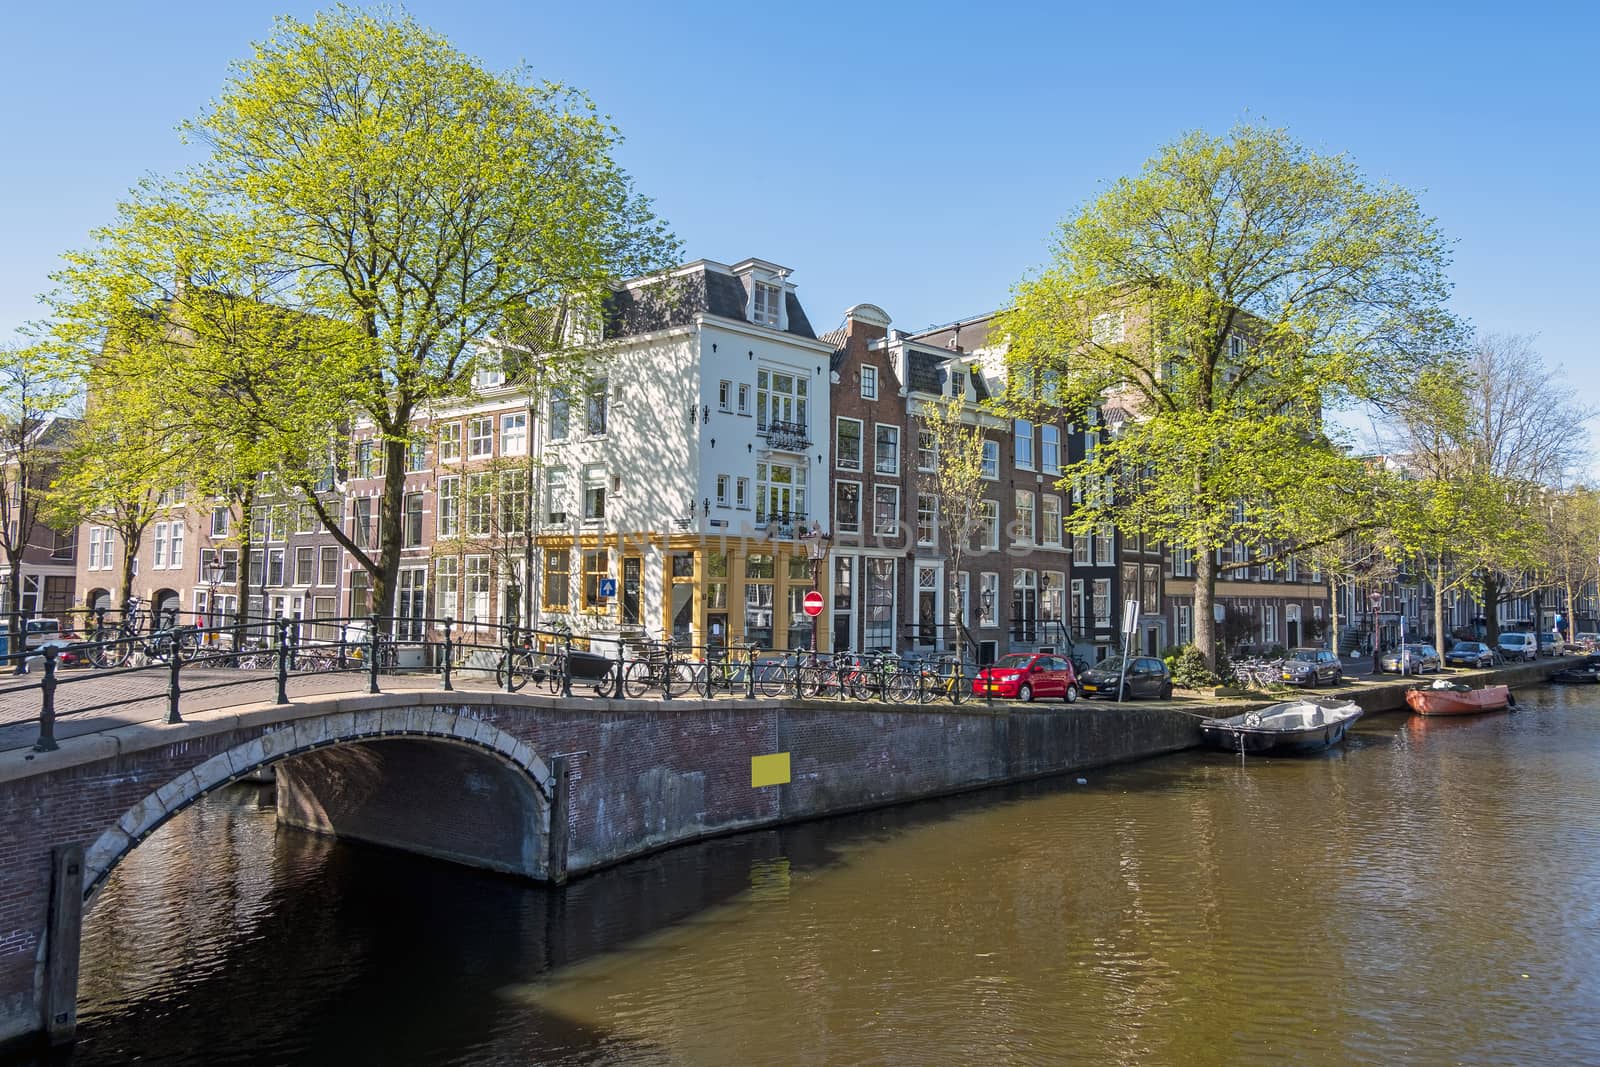 City scenic from Amsterdam at the canals in the Netherlands in spring